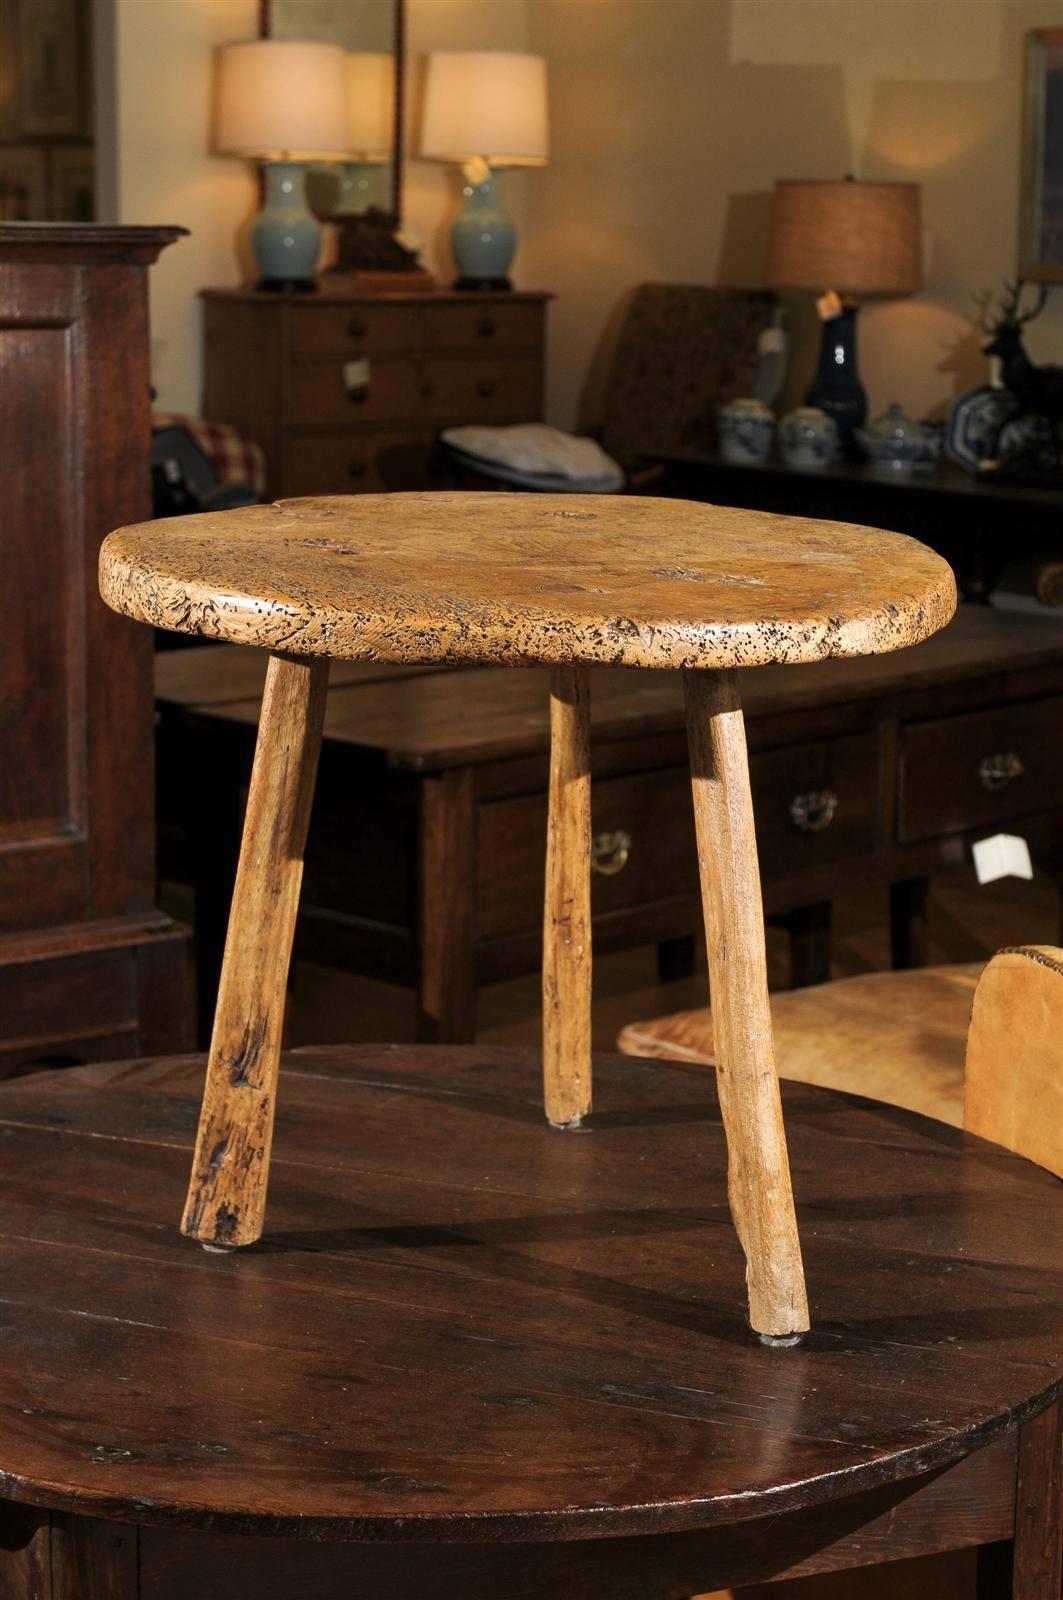 This beautiful, Sycamore, side table evokes warmth and character. It has a 2 inch thick top with three legs.